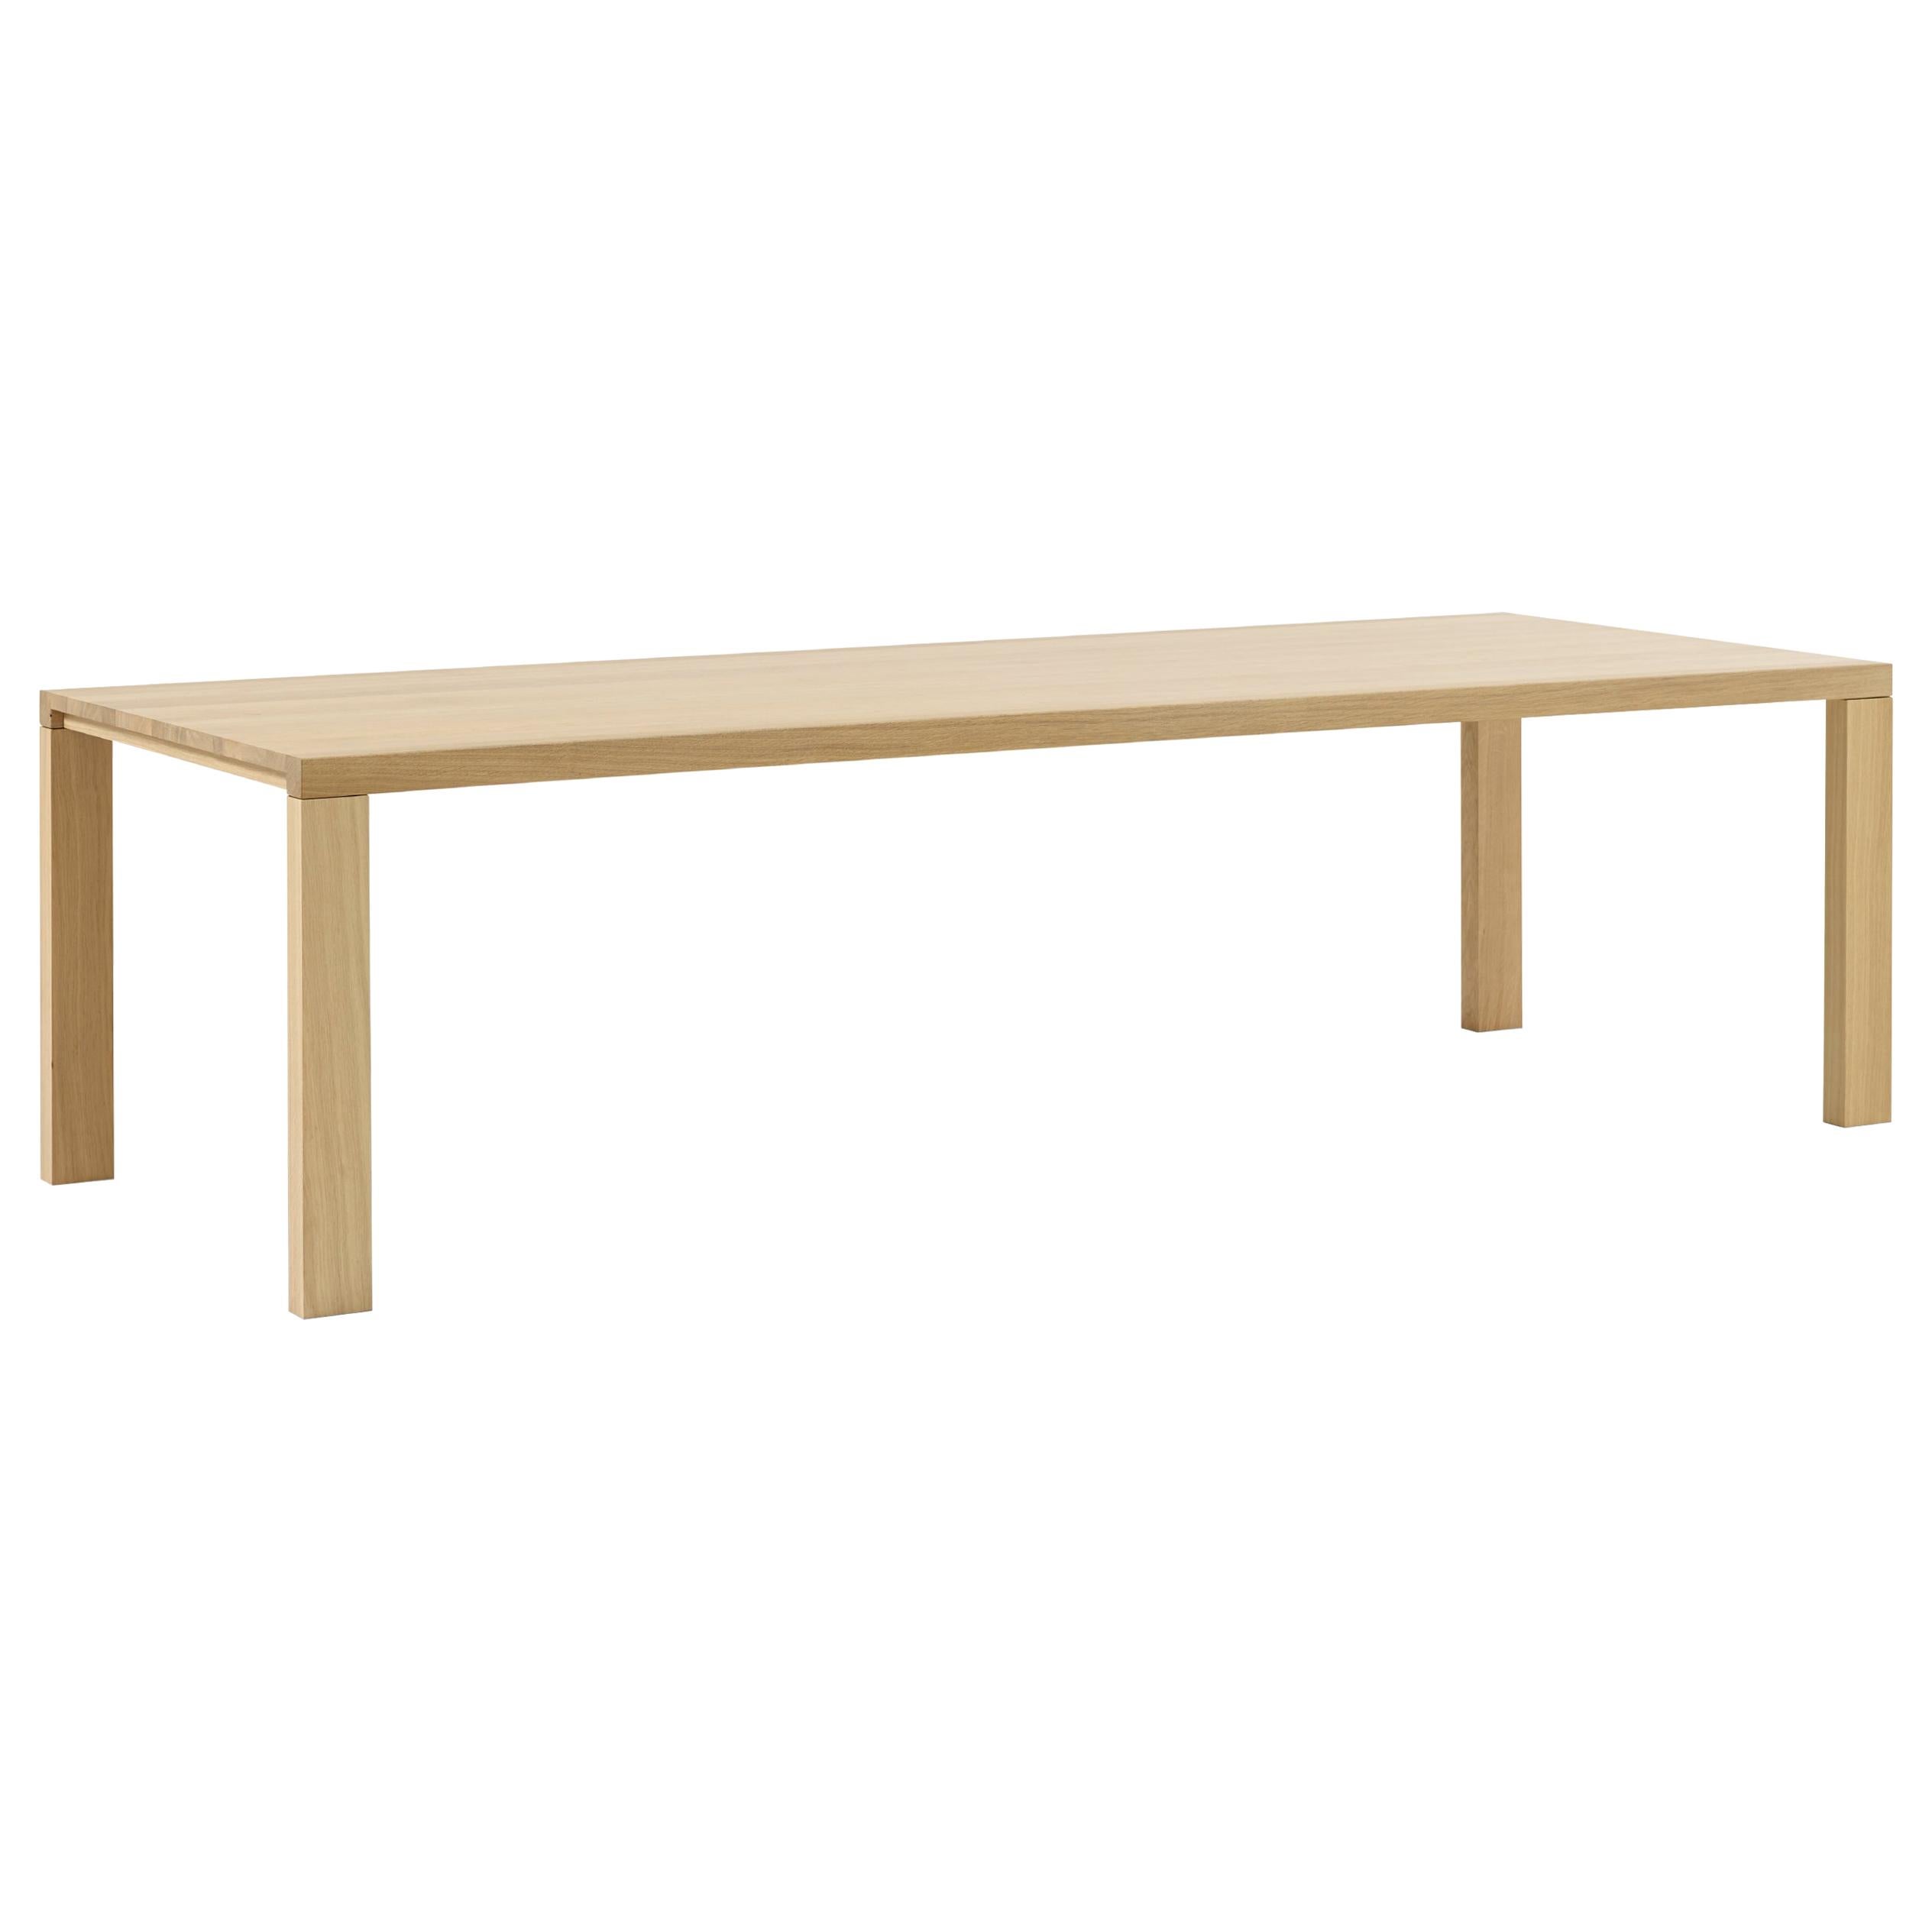 Cusstomizable Arco Essenza Rectangular Wood Table by Willem Van Ast